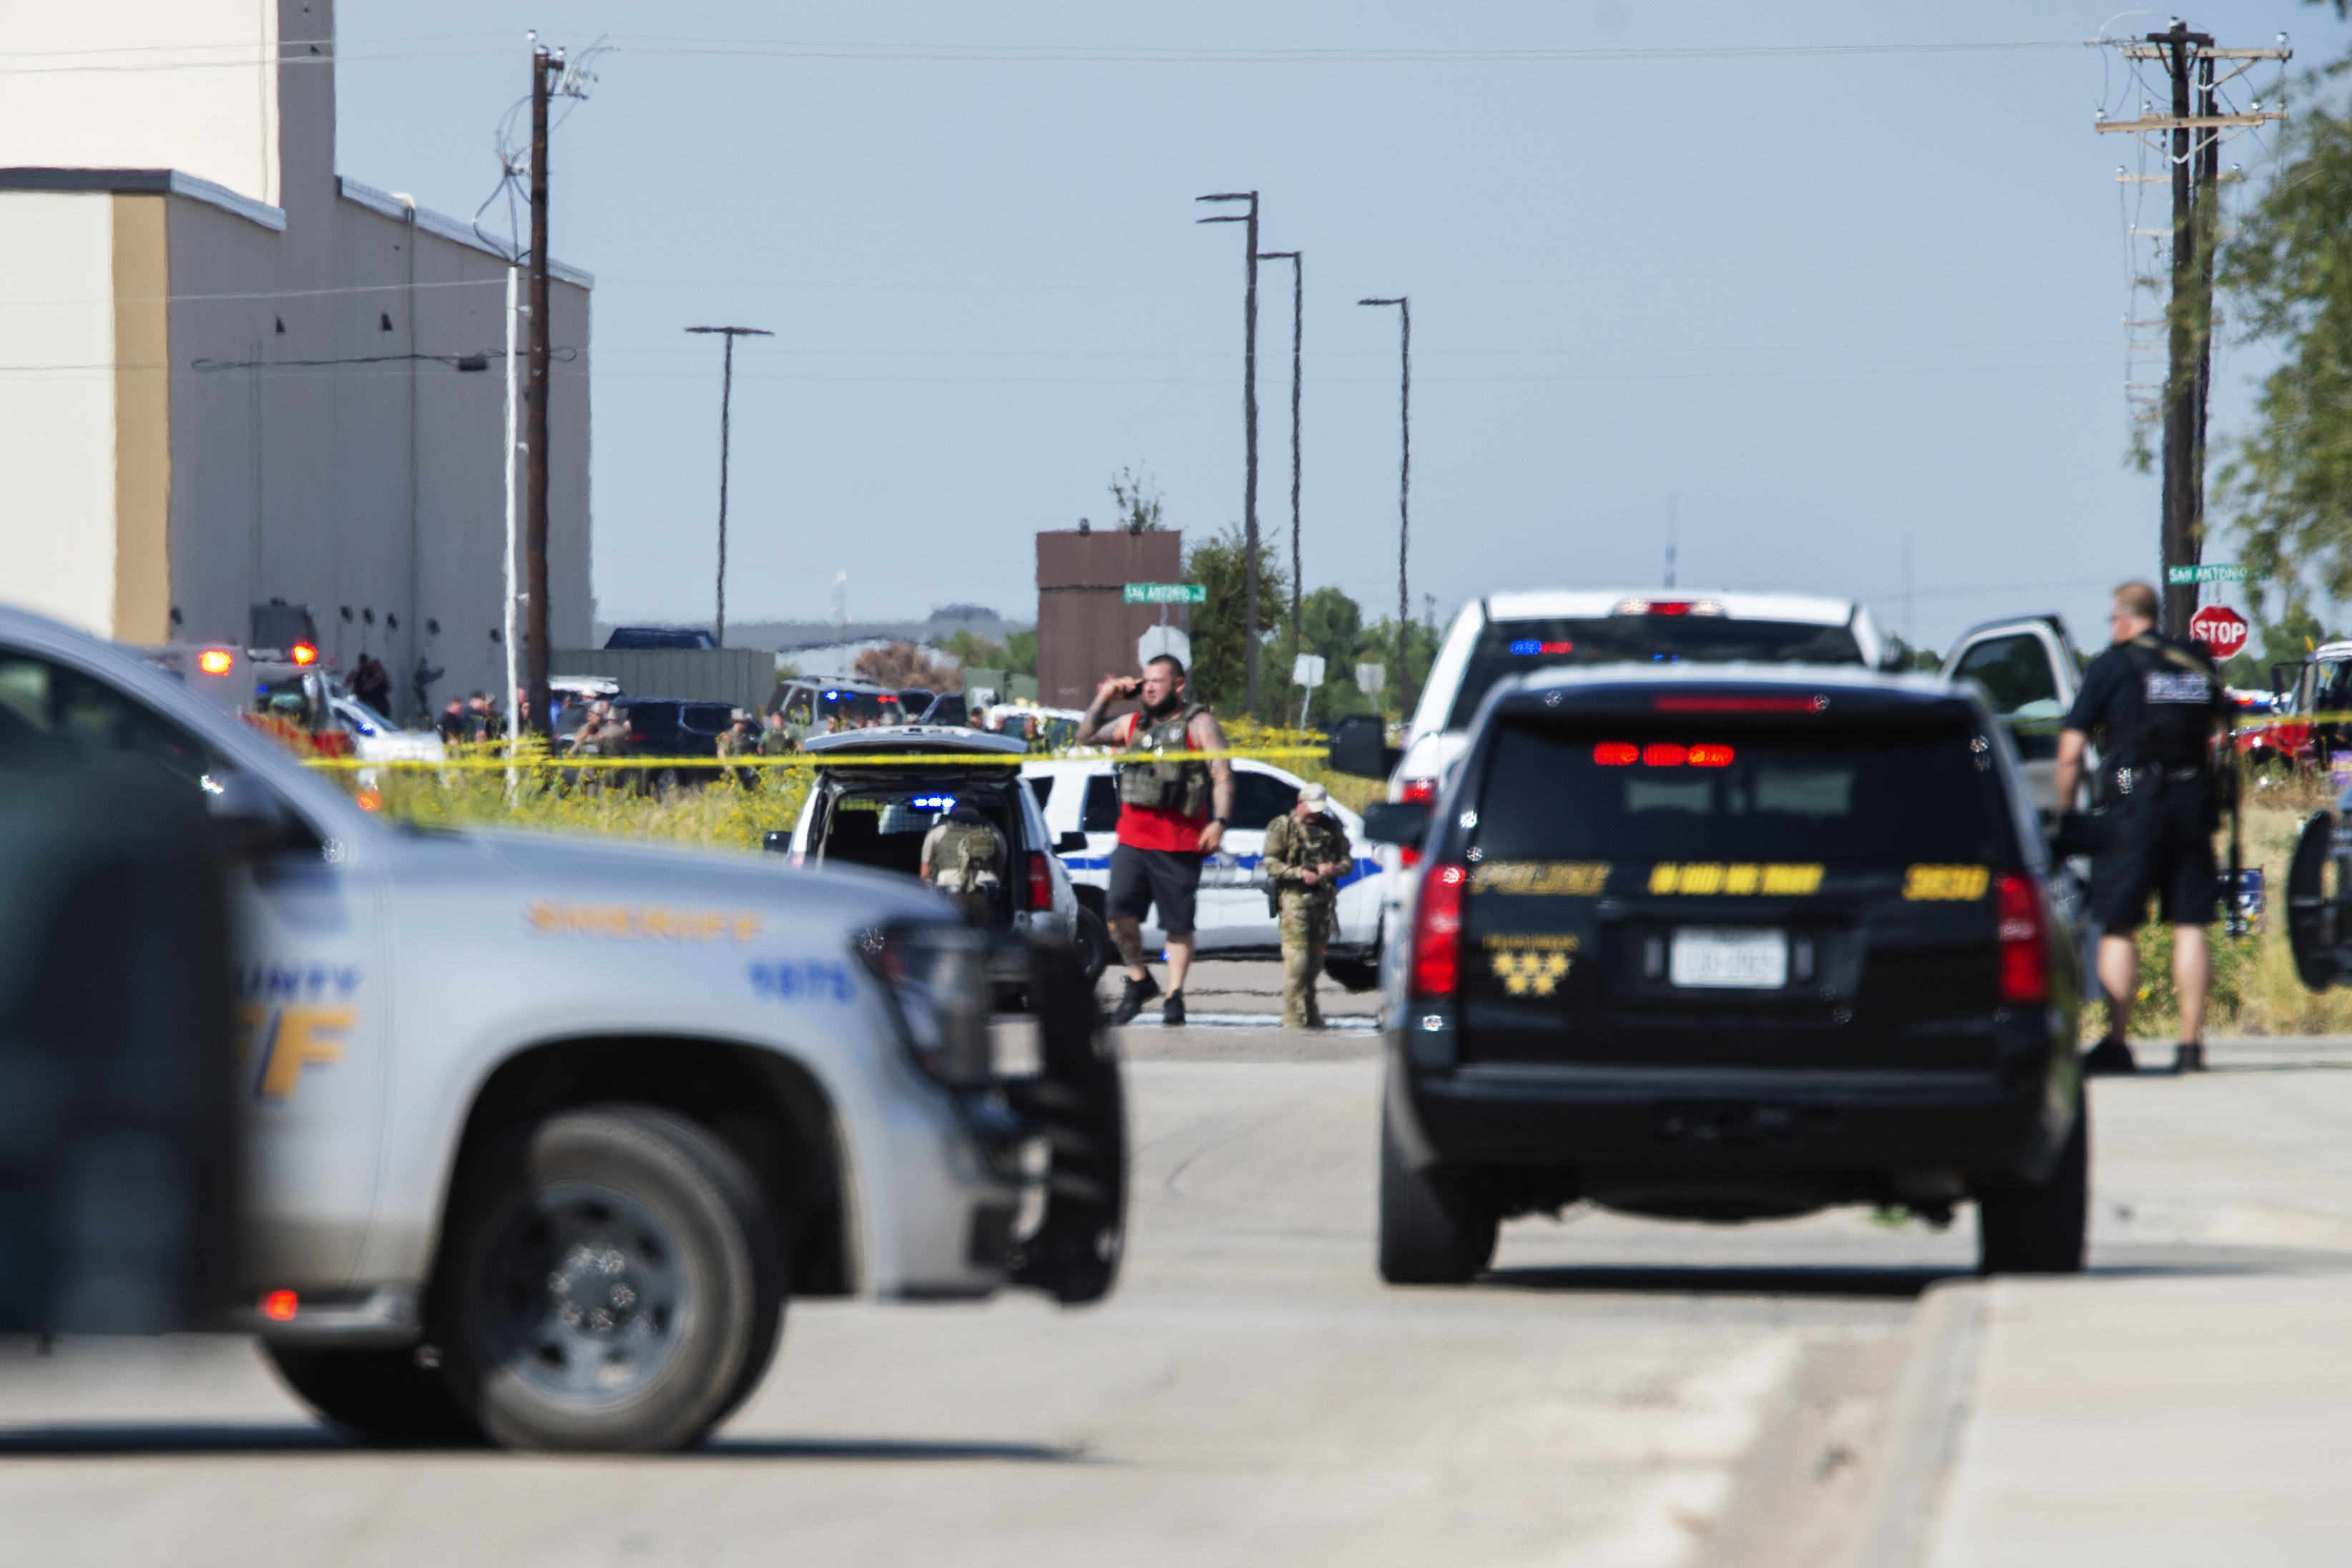 texas shooting CORRECTS THE NAME OF THE SOURCE TO THE MIDLAND REPORTER-TELEGRAM - Odessa and Midland police and sheriff's deputies surround the area behind Cinergy in Odessa, Texas, Saturday, Aug. 31, 2019, after reports of shootings. Police said there are "multiple gunshot victims" in West Texas after reports of gunfire on Saturday in the area of Midland and Odessa. (Tim Fischer/Midland Reporter-Telegram via AP)